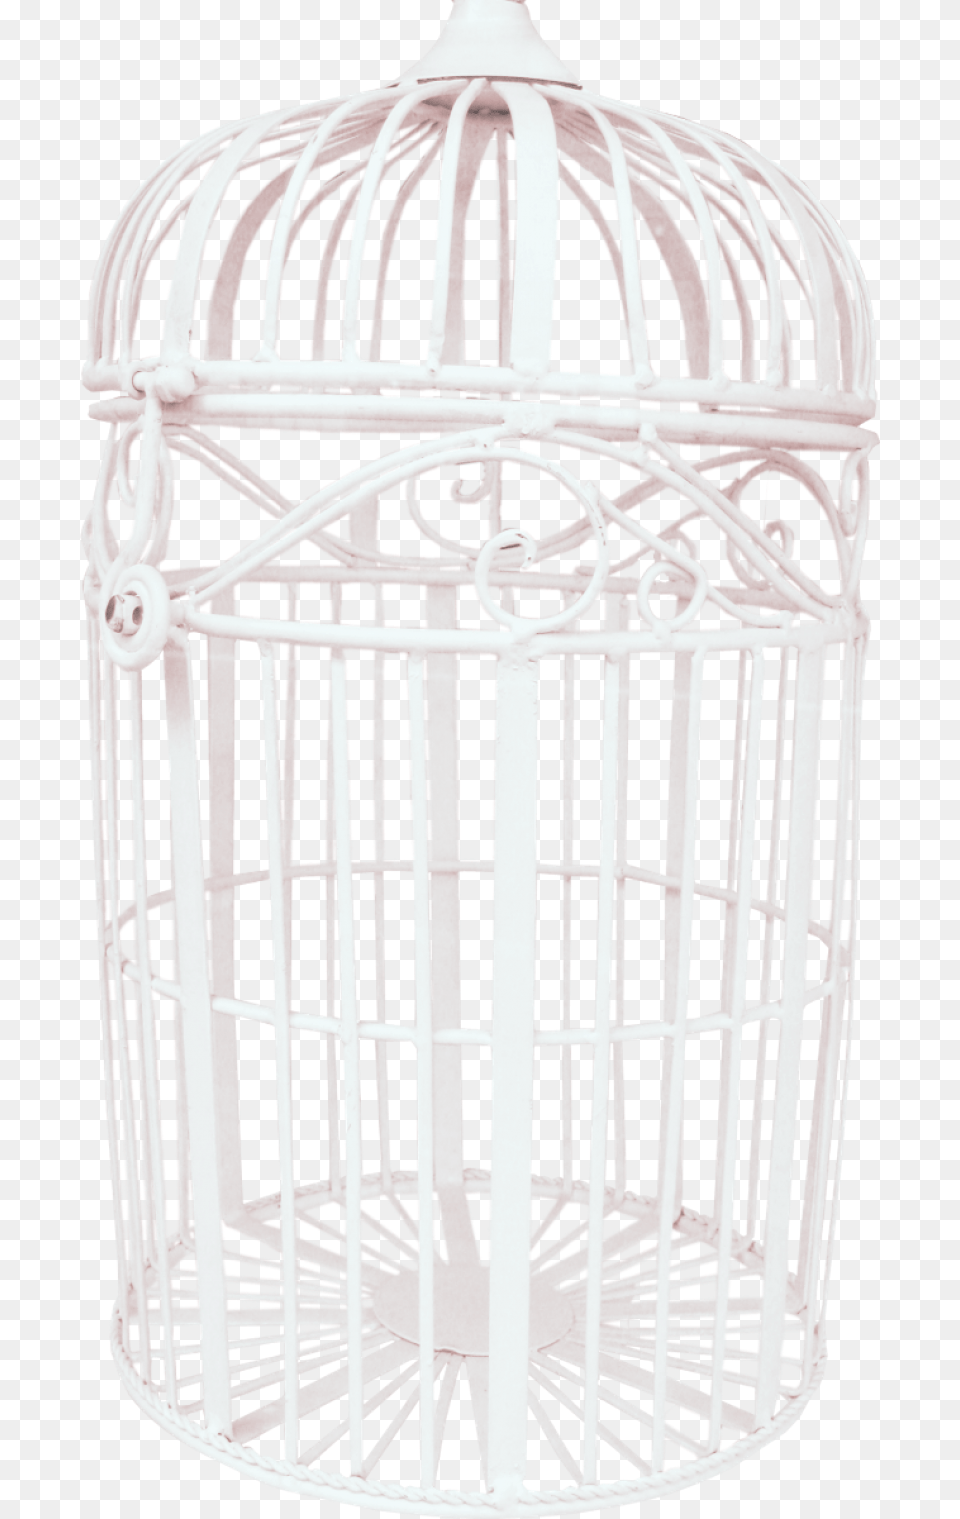 Download Bird Cage For Cage, Gate Png Image